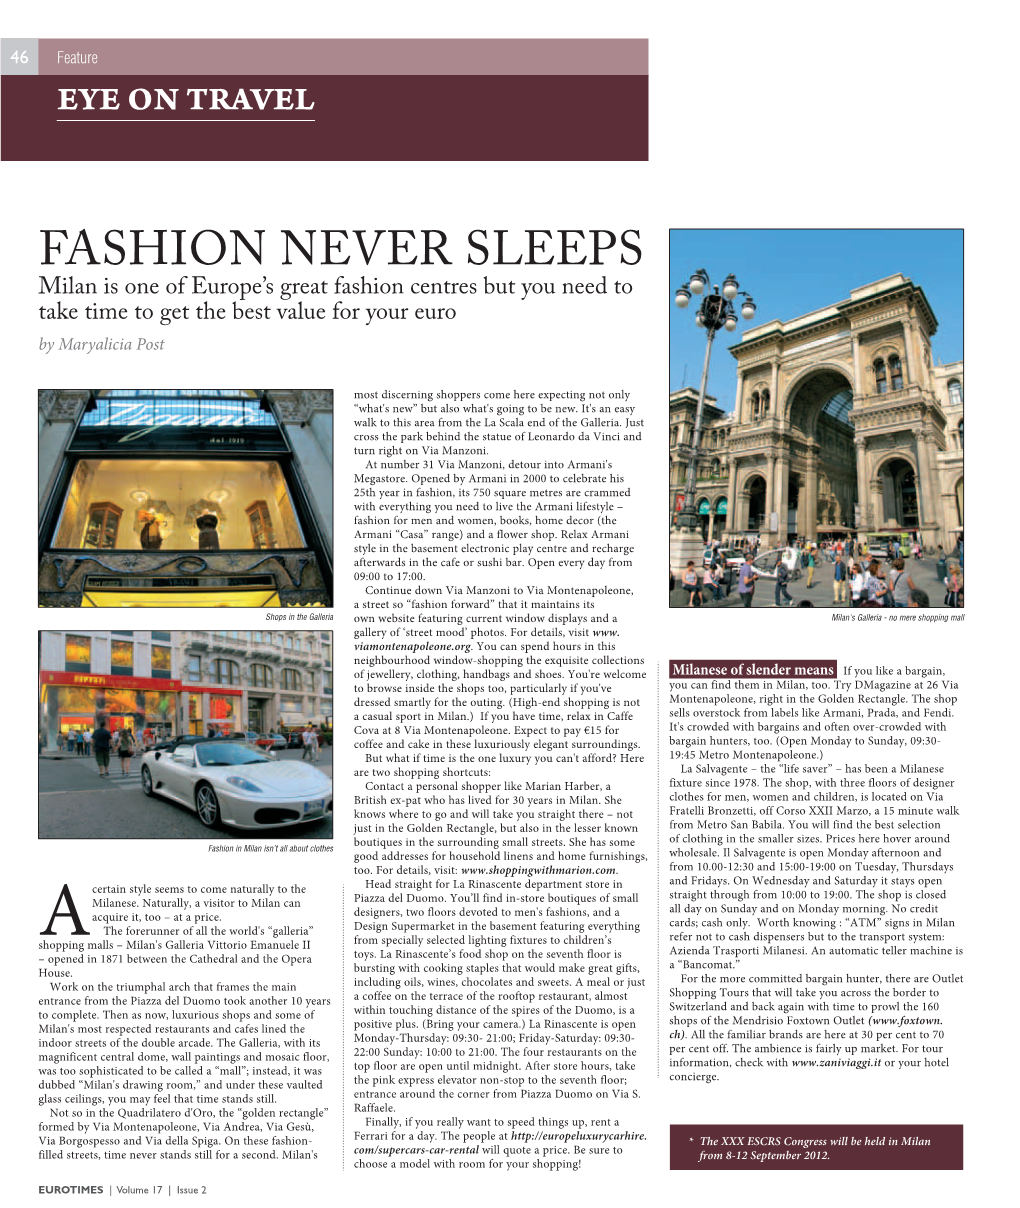 FASHION NEVER SLEEPS Milan Is One of Europe’S Great Fashion Centres but You Need to Take Time to Get the Best Value for Your Euro by Maryalicia Post